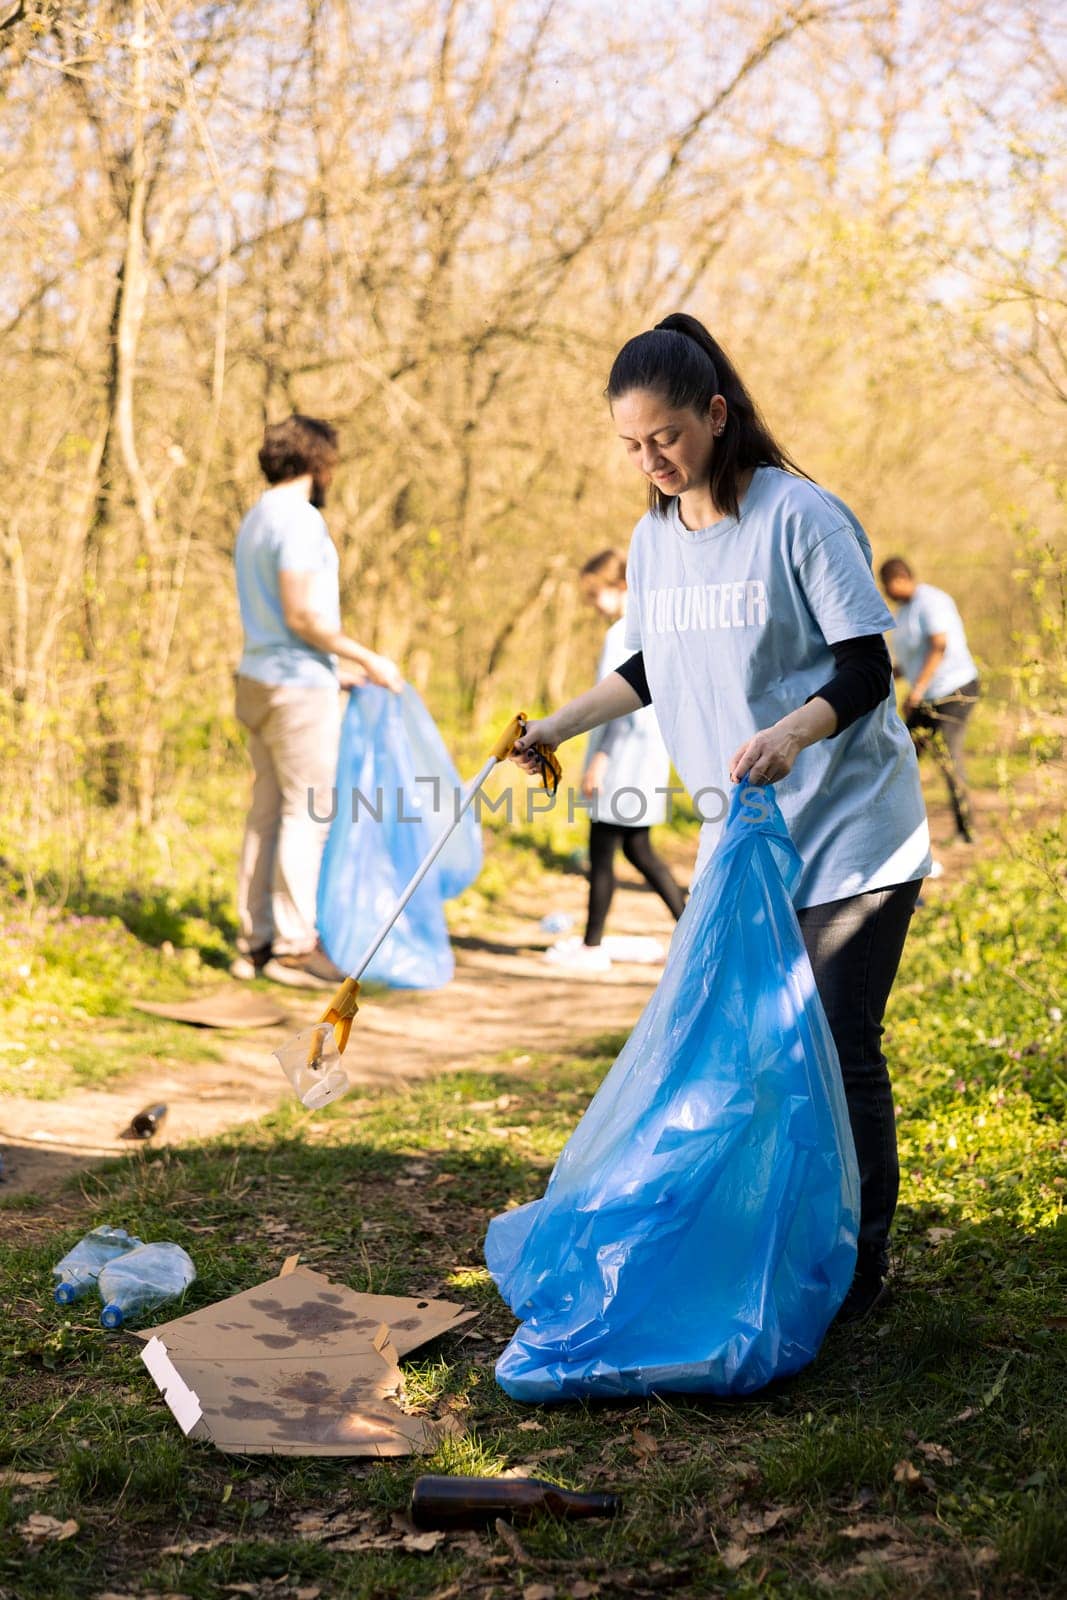 Female volunteer tidying the woodland of garbage and plastic bottles by DCStudio